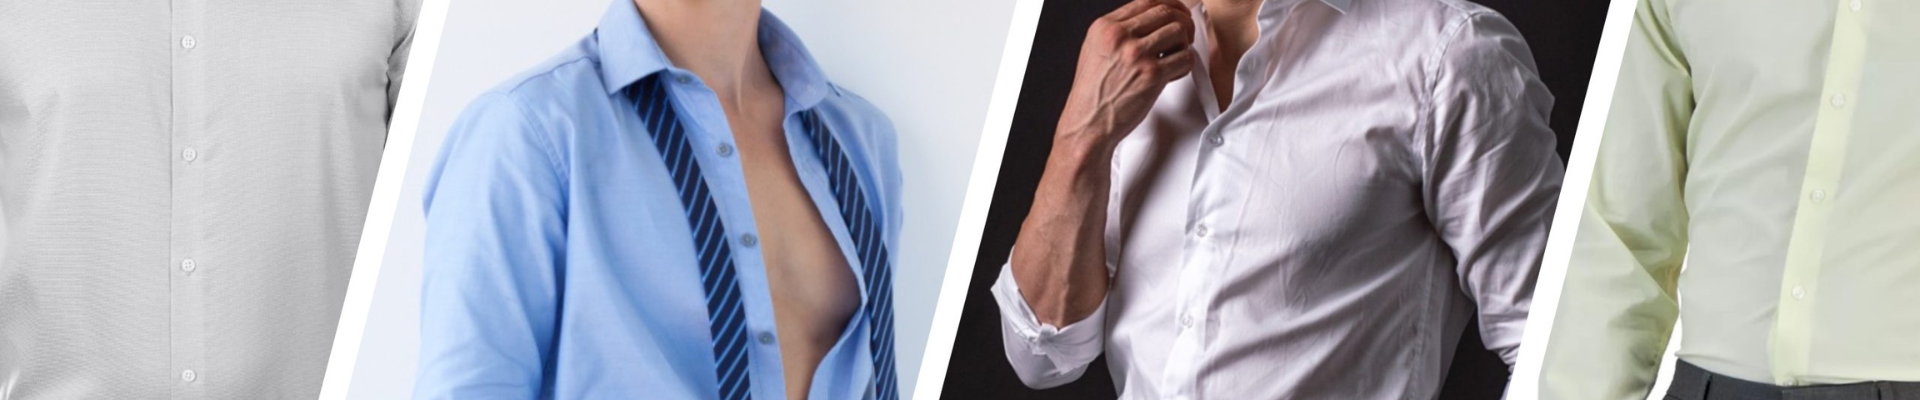 Matching with Confidence: Choosing the Right Shirt for Your Skin Tone